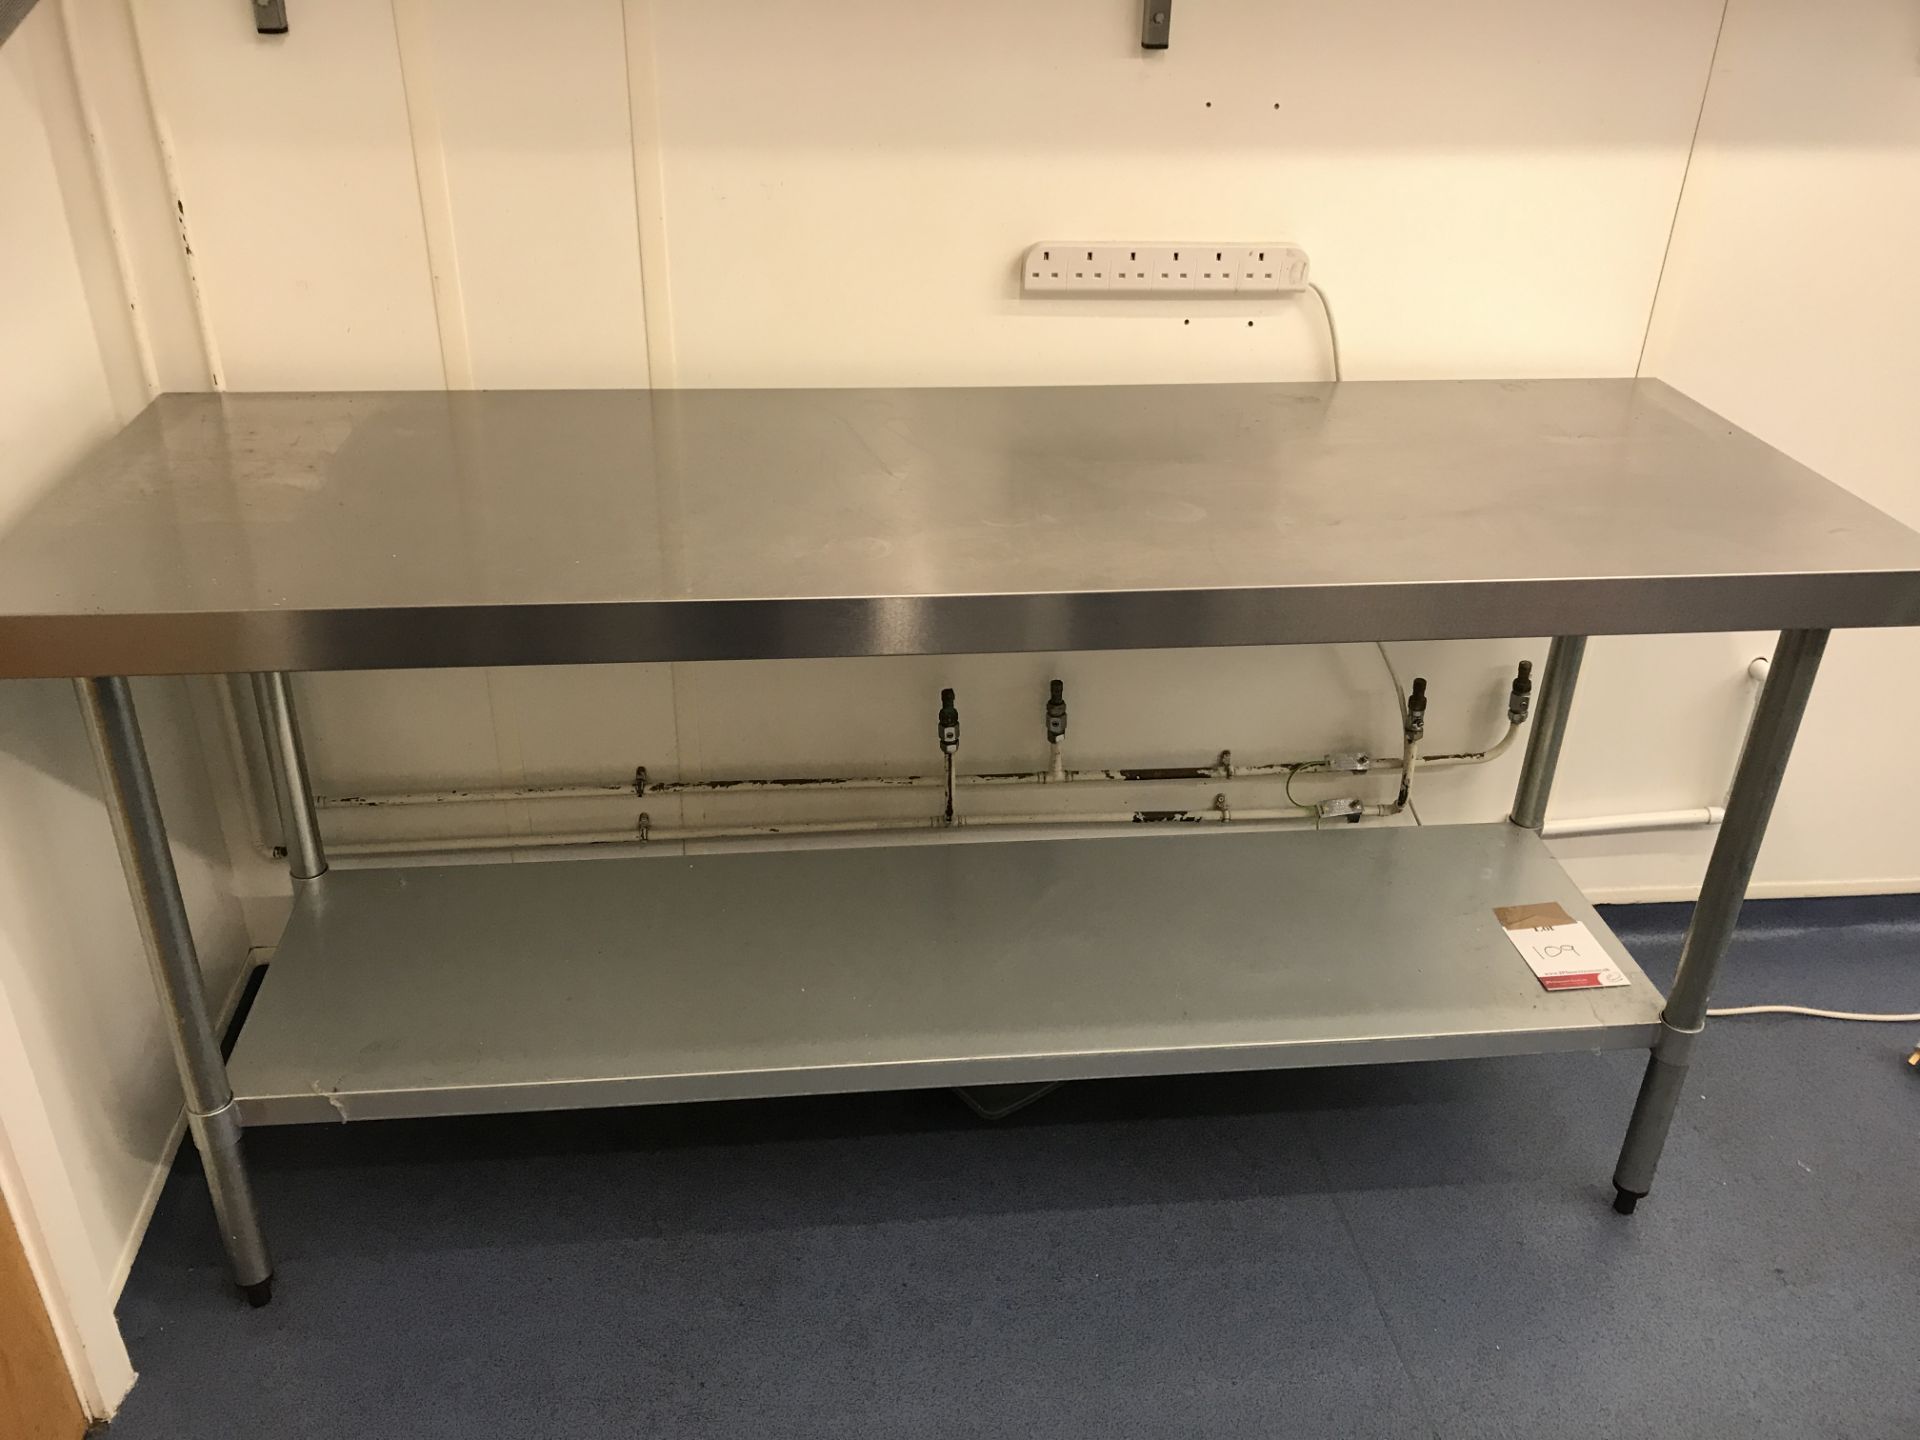 Stainless steel food preparation table 180 x 60 x 91 cm with undershelf